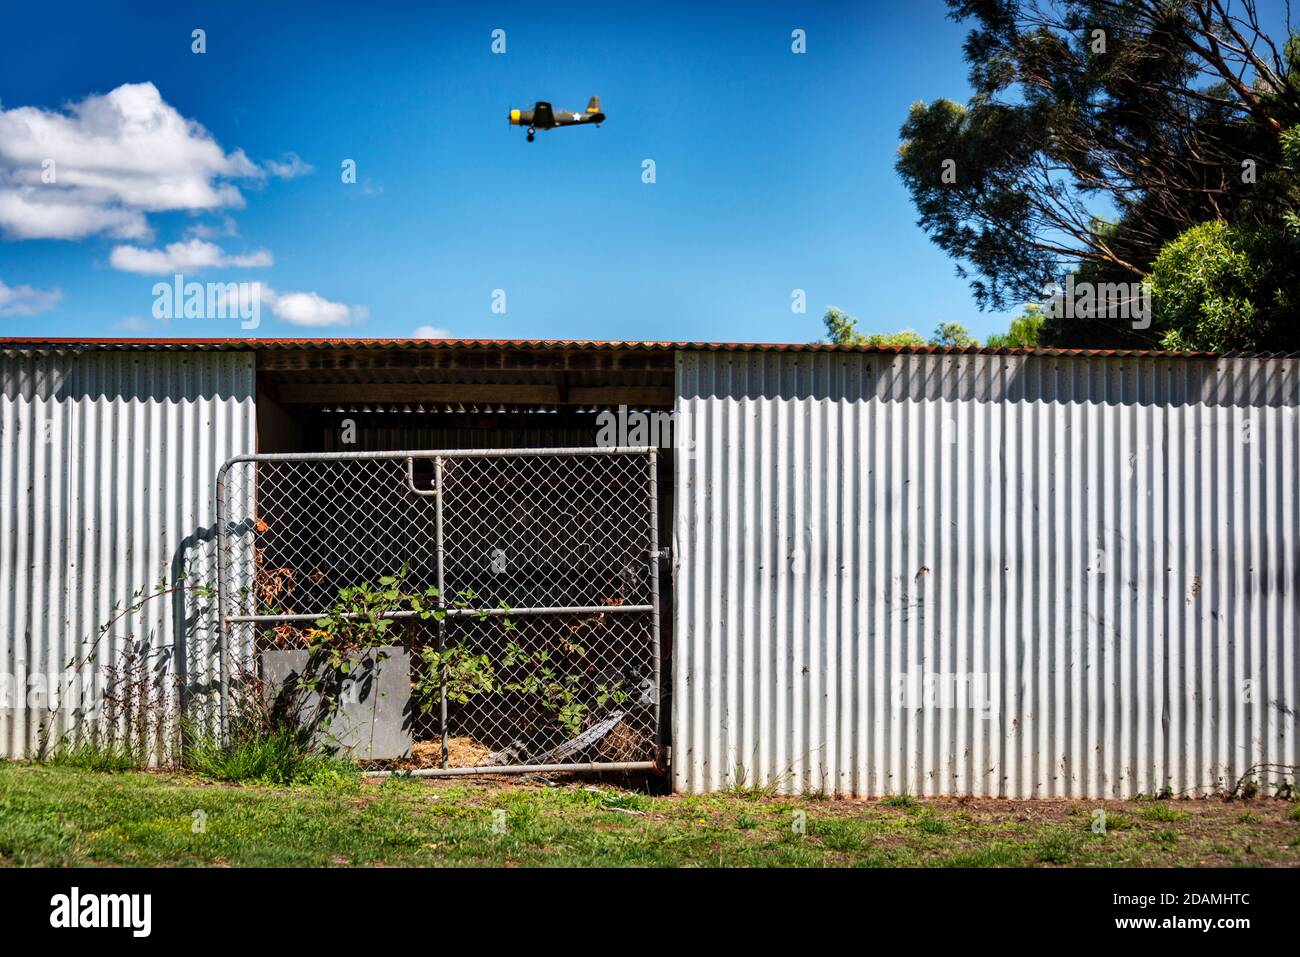 A vintage aircraft flying over a silver corrugated shed with a tin roof and metal gate overgrown with vine against a blue sky with clouds Stock Photo